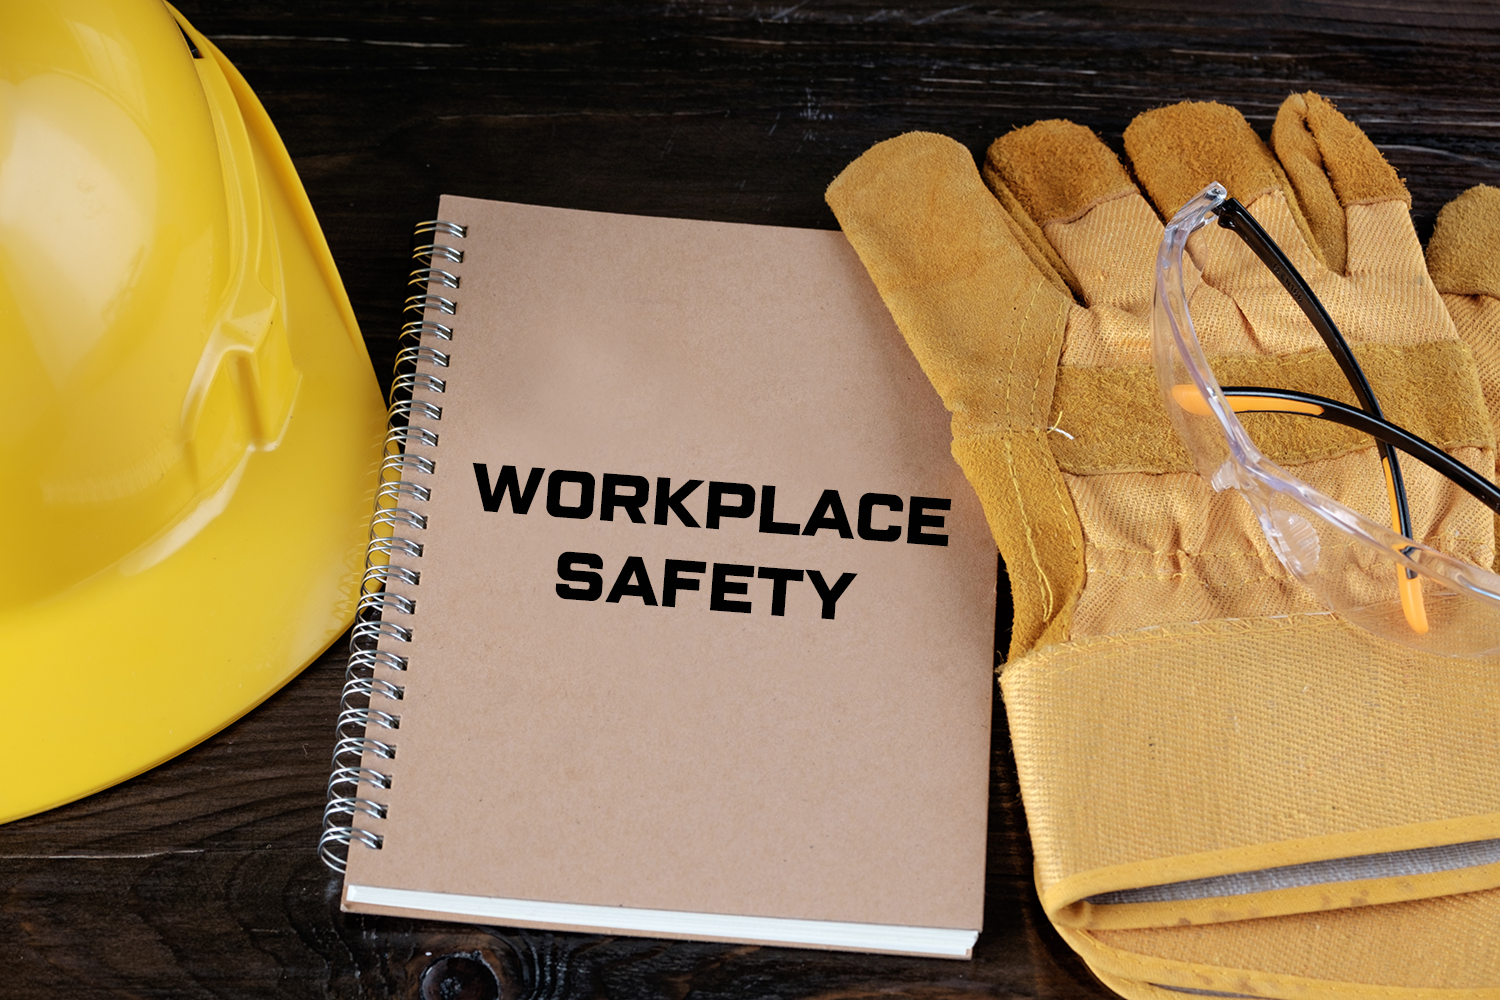 Gibson’s innovative approach to workplace safety a winning formula for roofing industry